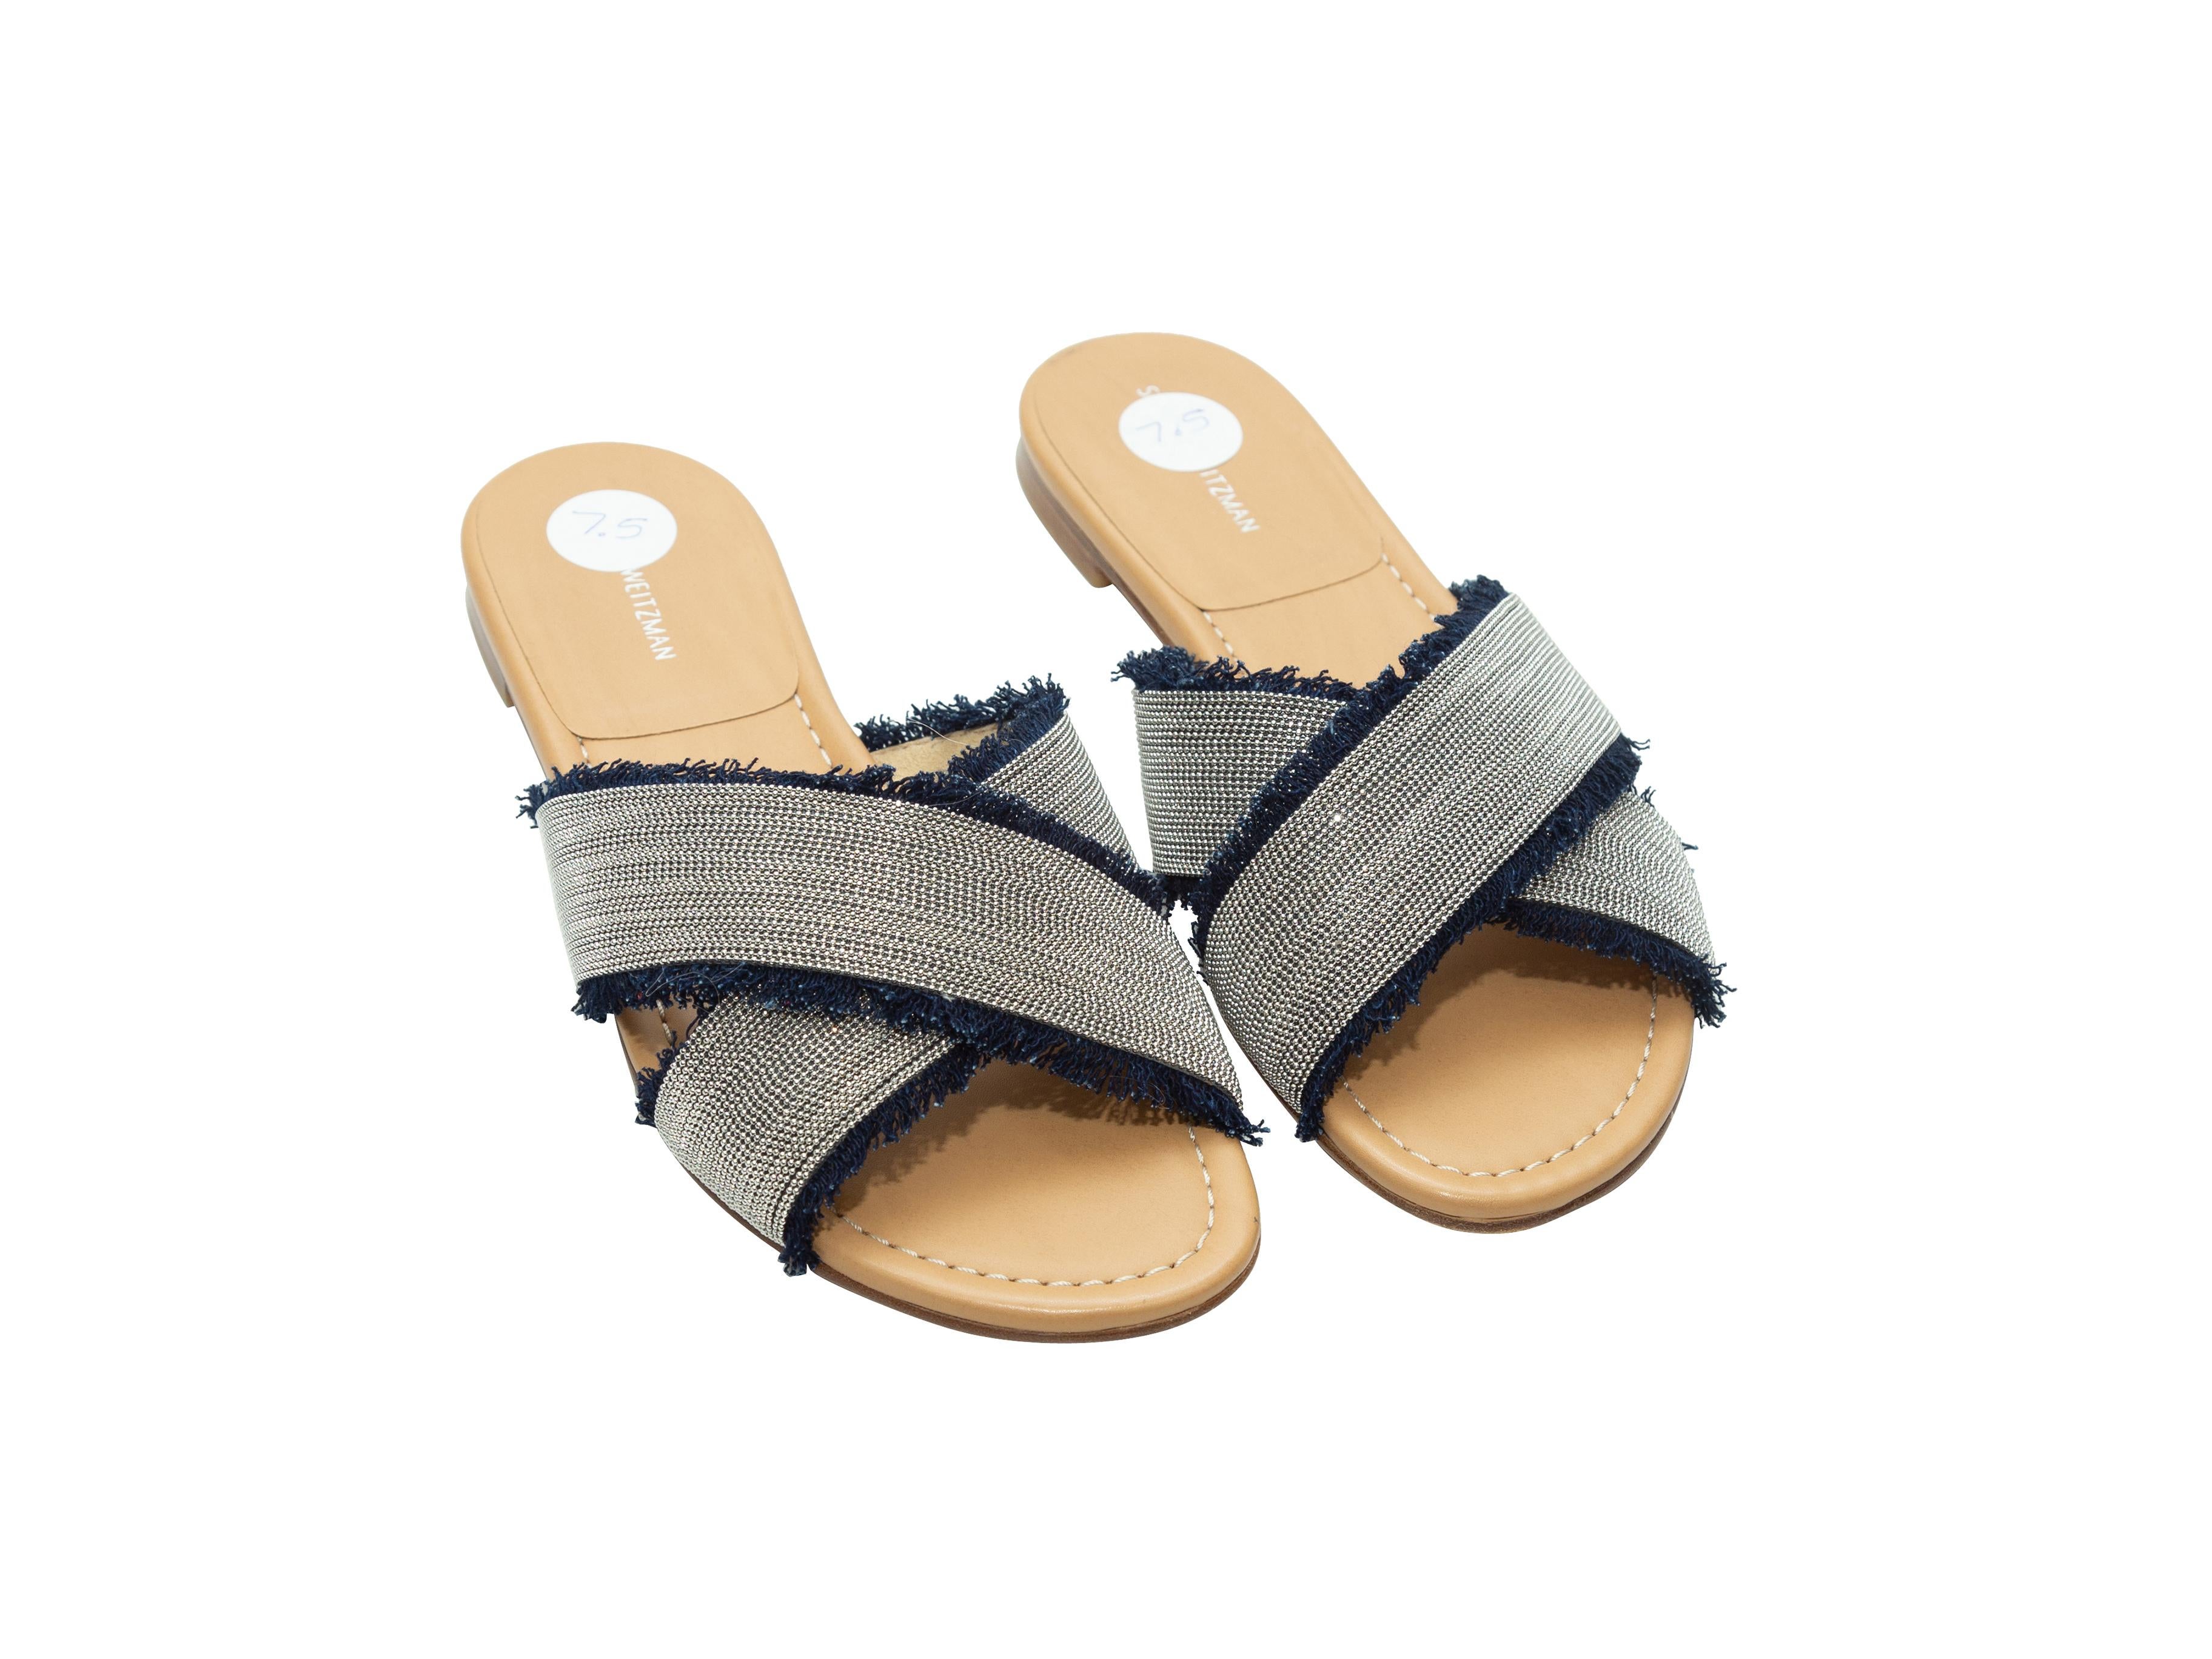 Product details: Navy and silver-tone slide sandals by Stuart Weitzman. Beading throughout. Fringe trim.
Condition: Pre-owned. Very good. Light wear at soles.
Est. Retail $ 430.00